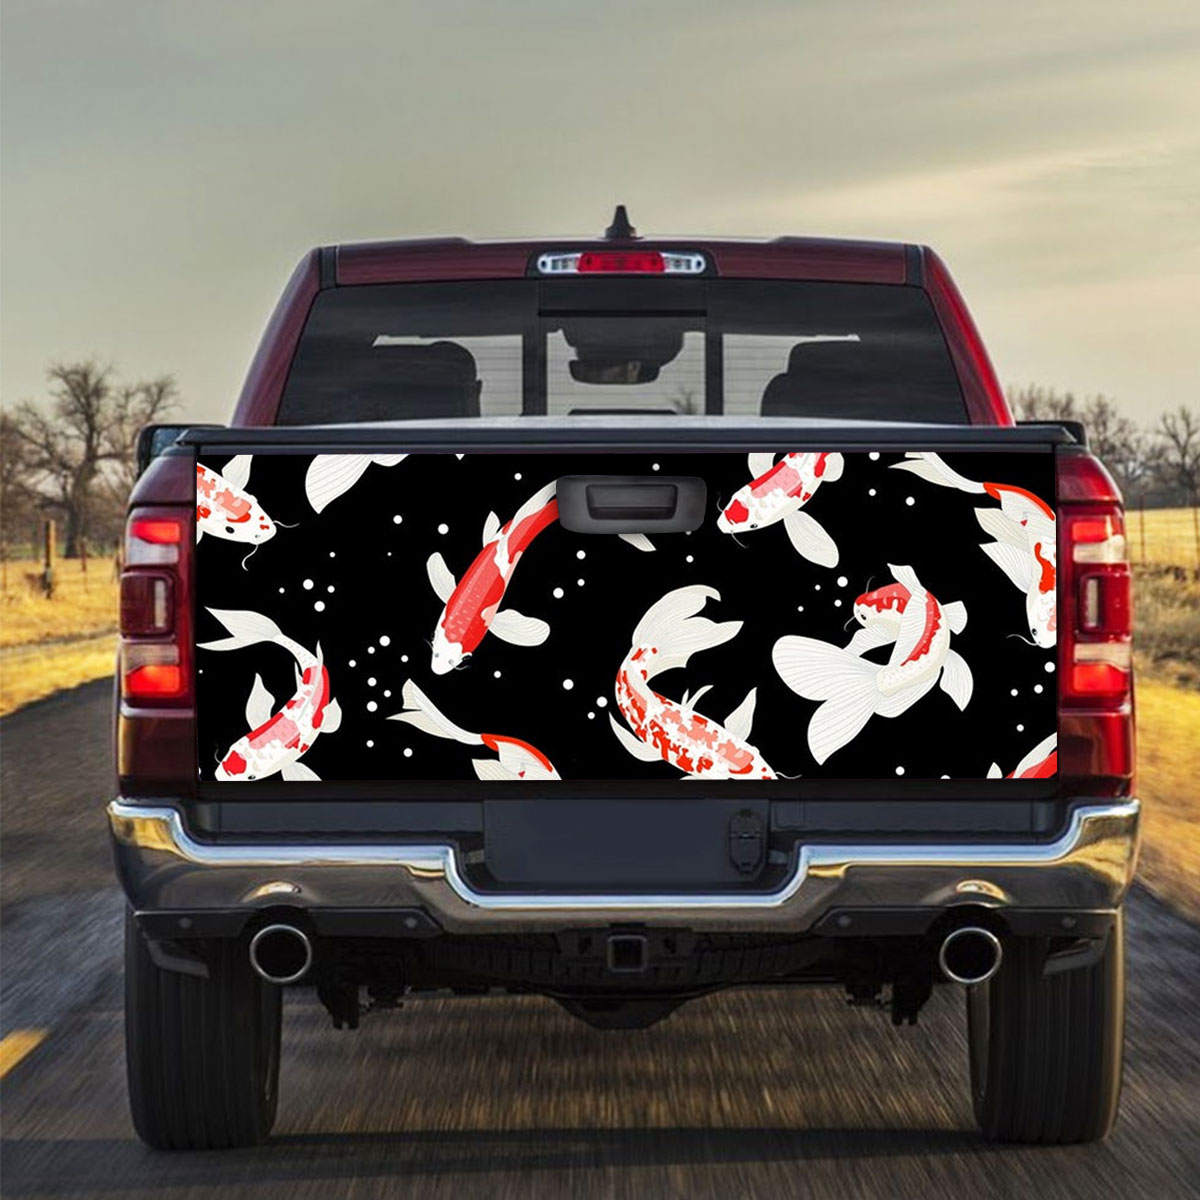 Black Water Koi Fish Truck Bed Decal